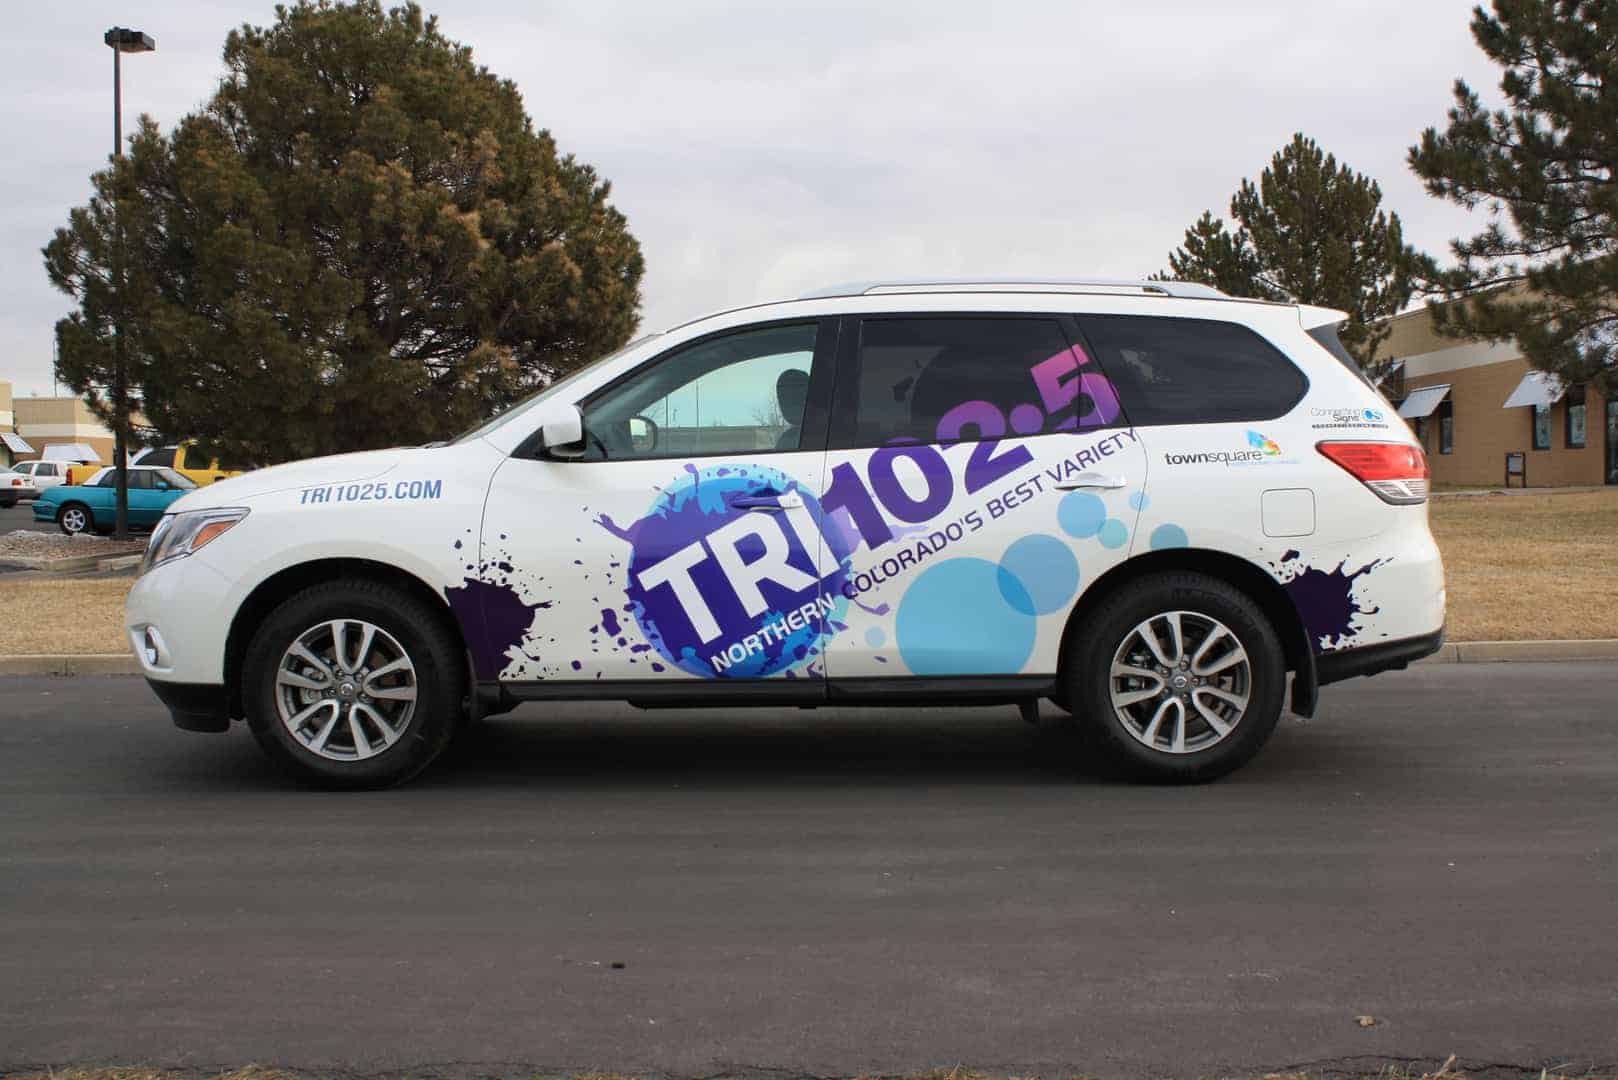 Previous logo design and full vehicle wrap